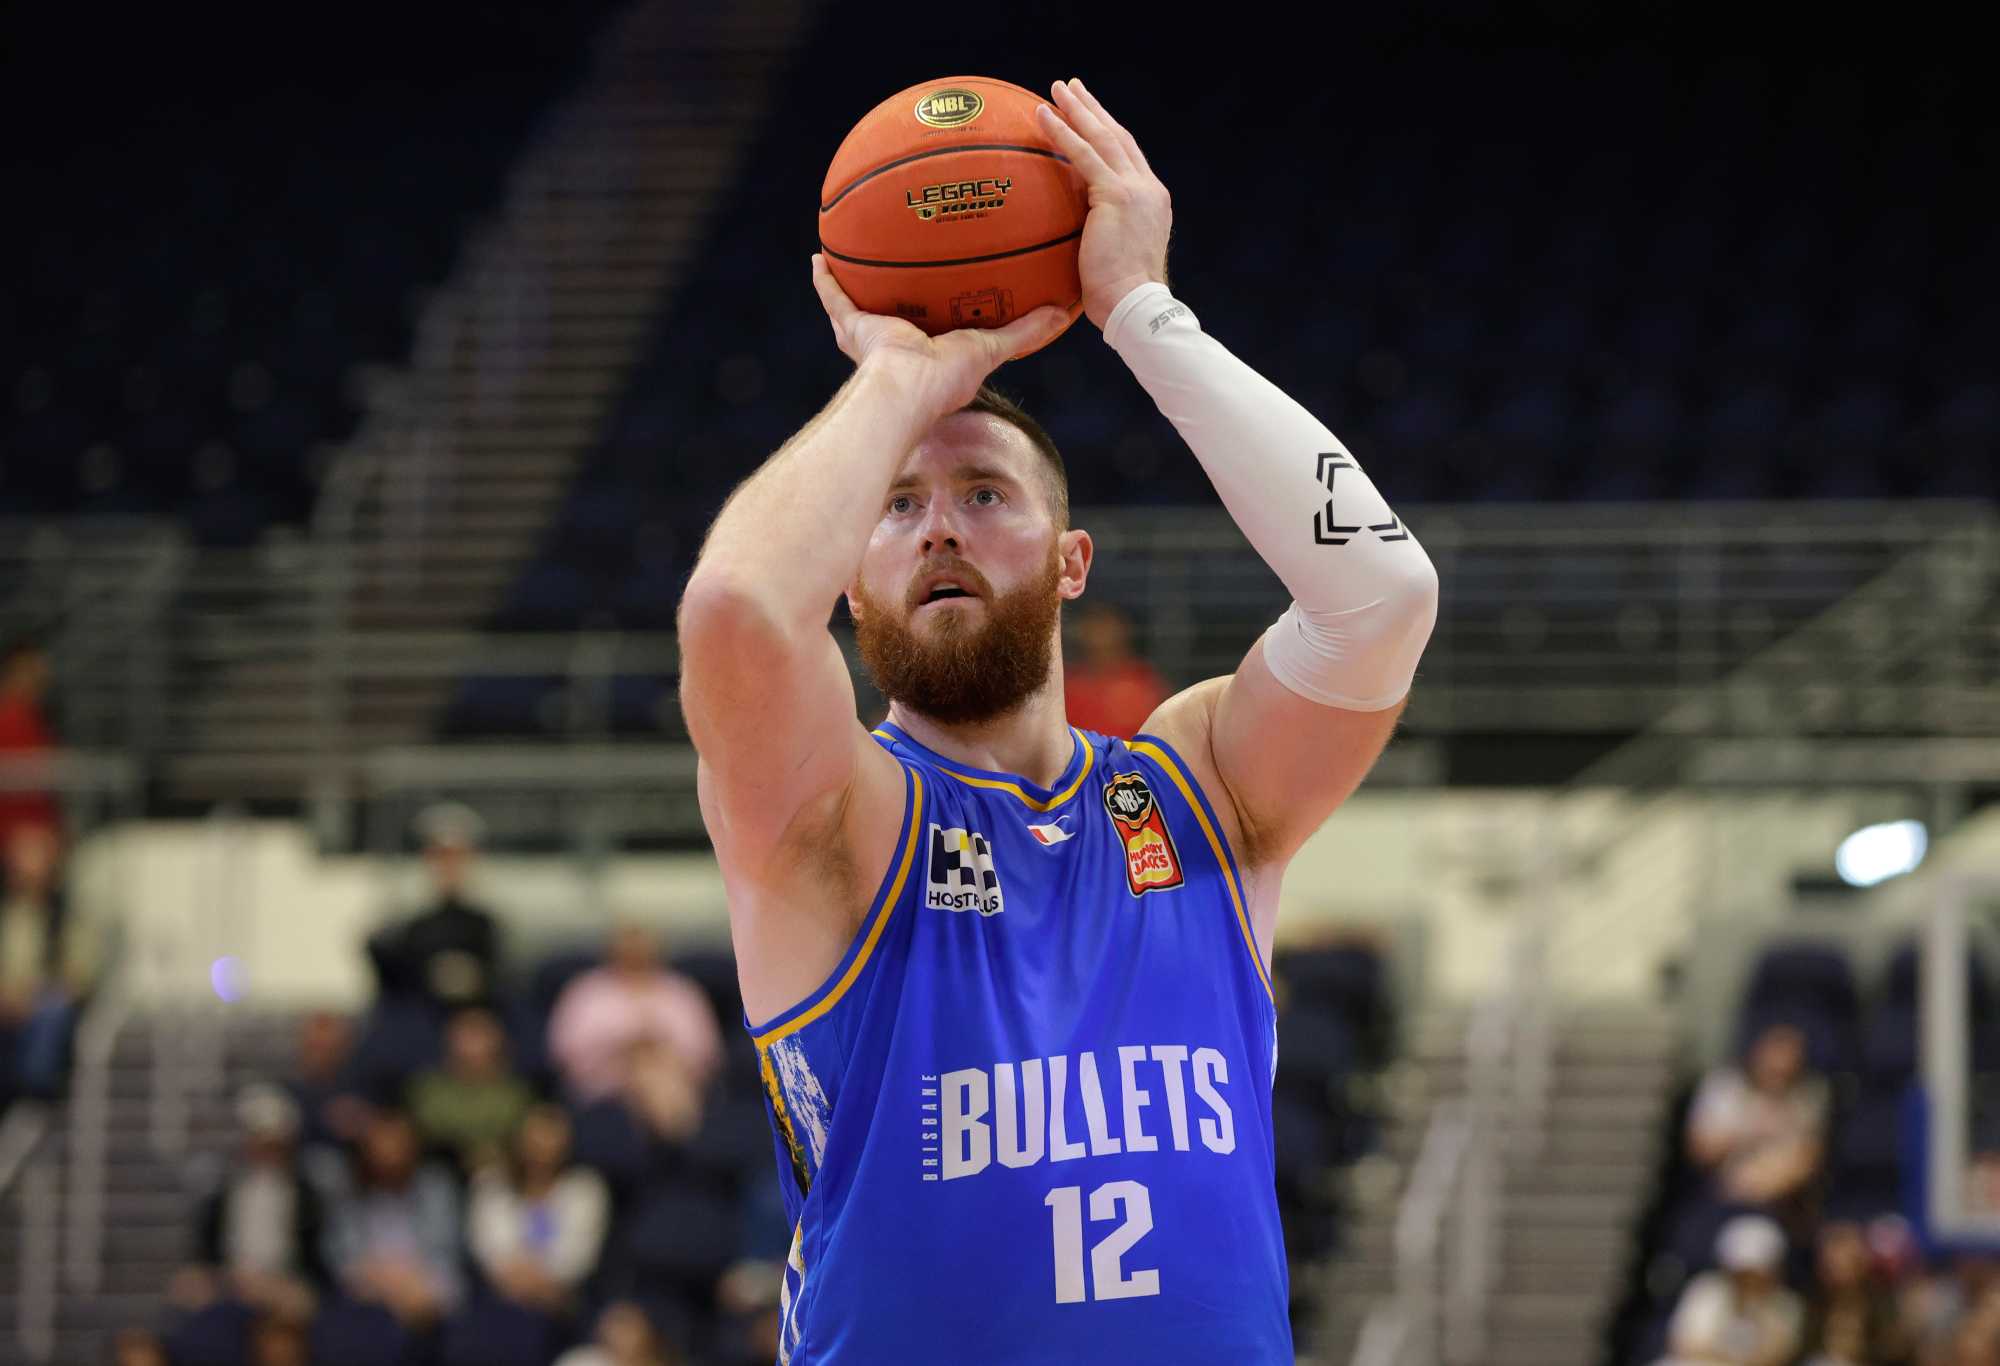 GOLD COAST, AUSTRALIA - SEPTEMBER 20: Aron Baynes of the Bullets shoots from the free throw line during the 2023 NBL Blitz match between Brisbane Bullets and Illawarra Hawks at Gold Coast Convention and Exhibition Centre on September 20, 2023 in Gold Coast, Australia. (Photo by Russell Freeman/Getty Images for NBL)